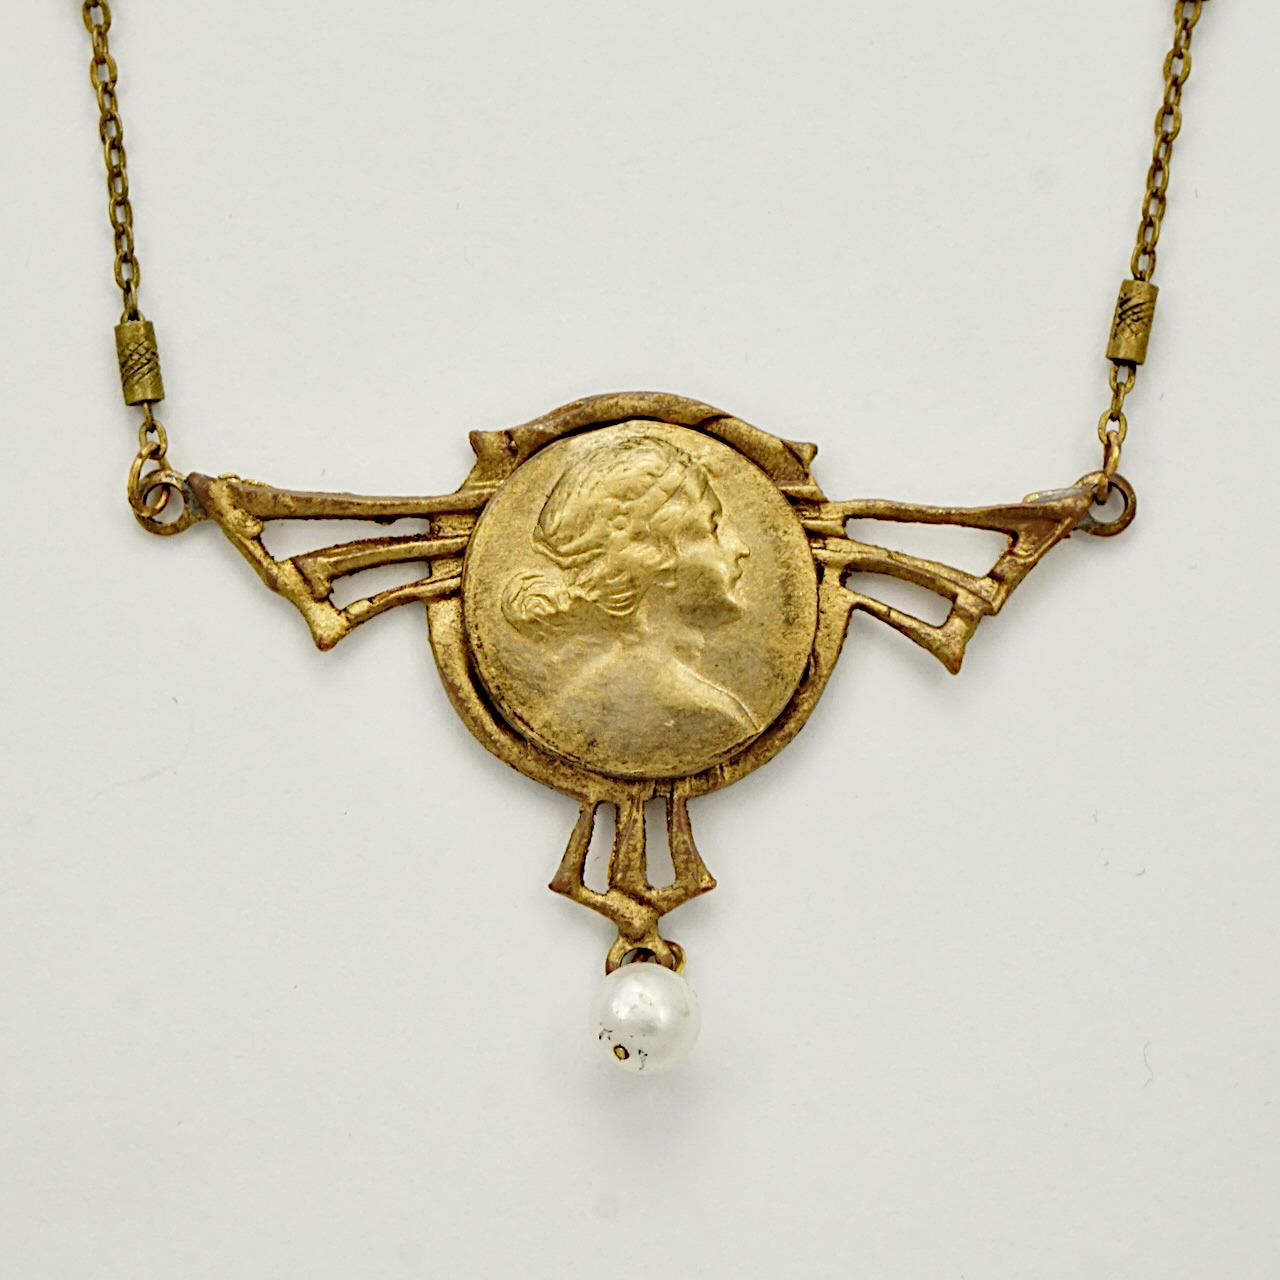 Lovely Art Nouveau gilt metal lady pendant with a cultured pearl drop, and fancy link chain. The necklace measures length 57 cm / 22.4 inches. There is wear to the gilt.

This is a beautiful Art Nouveau pendant and chain.